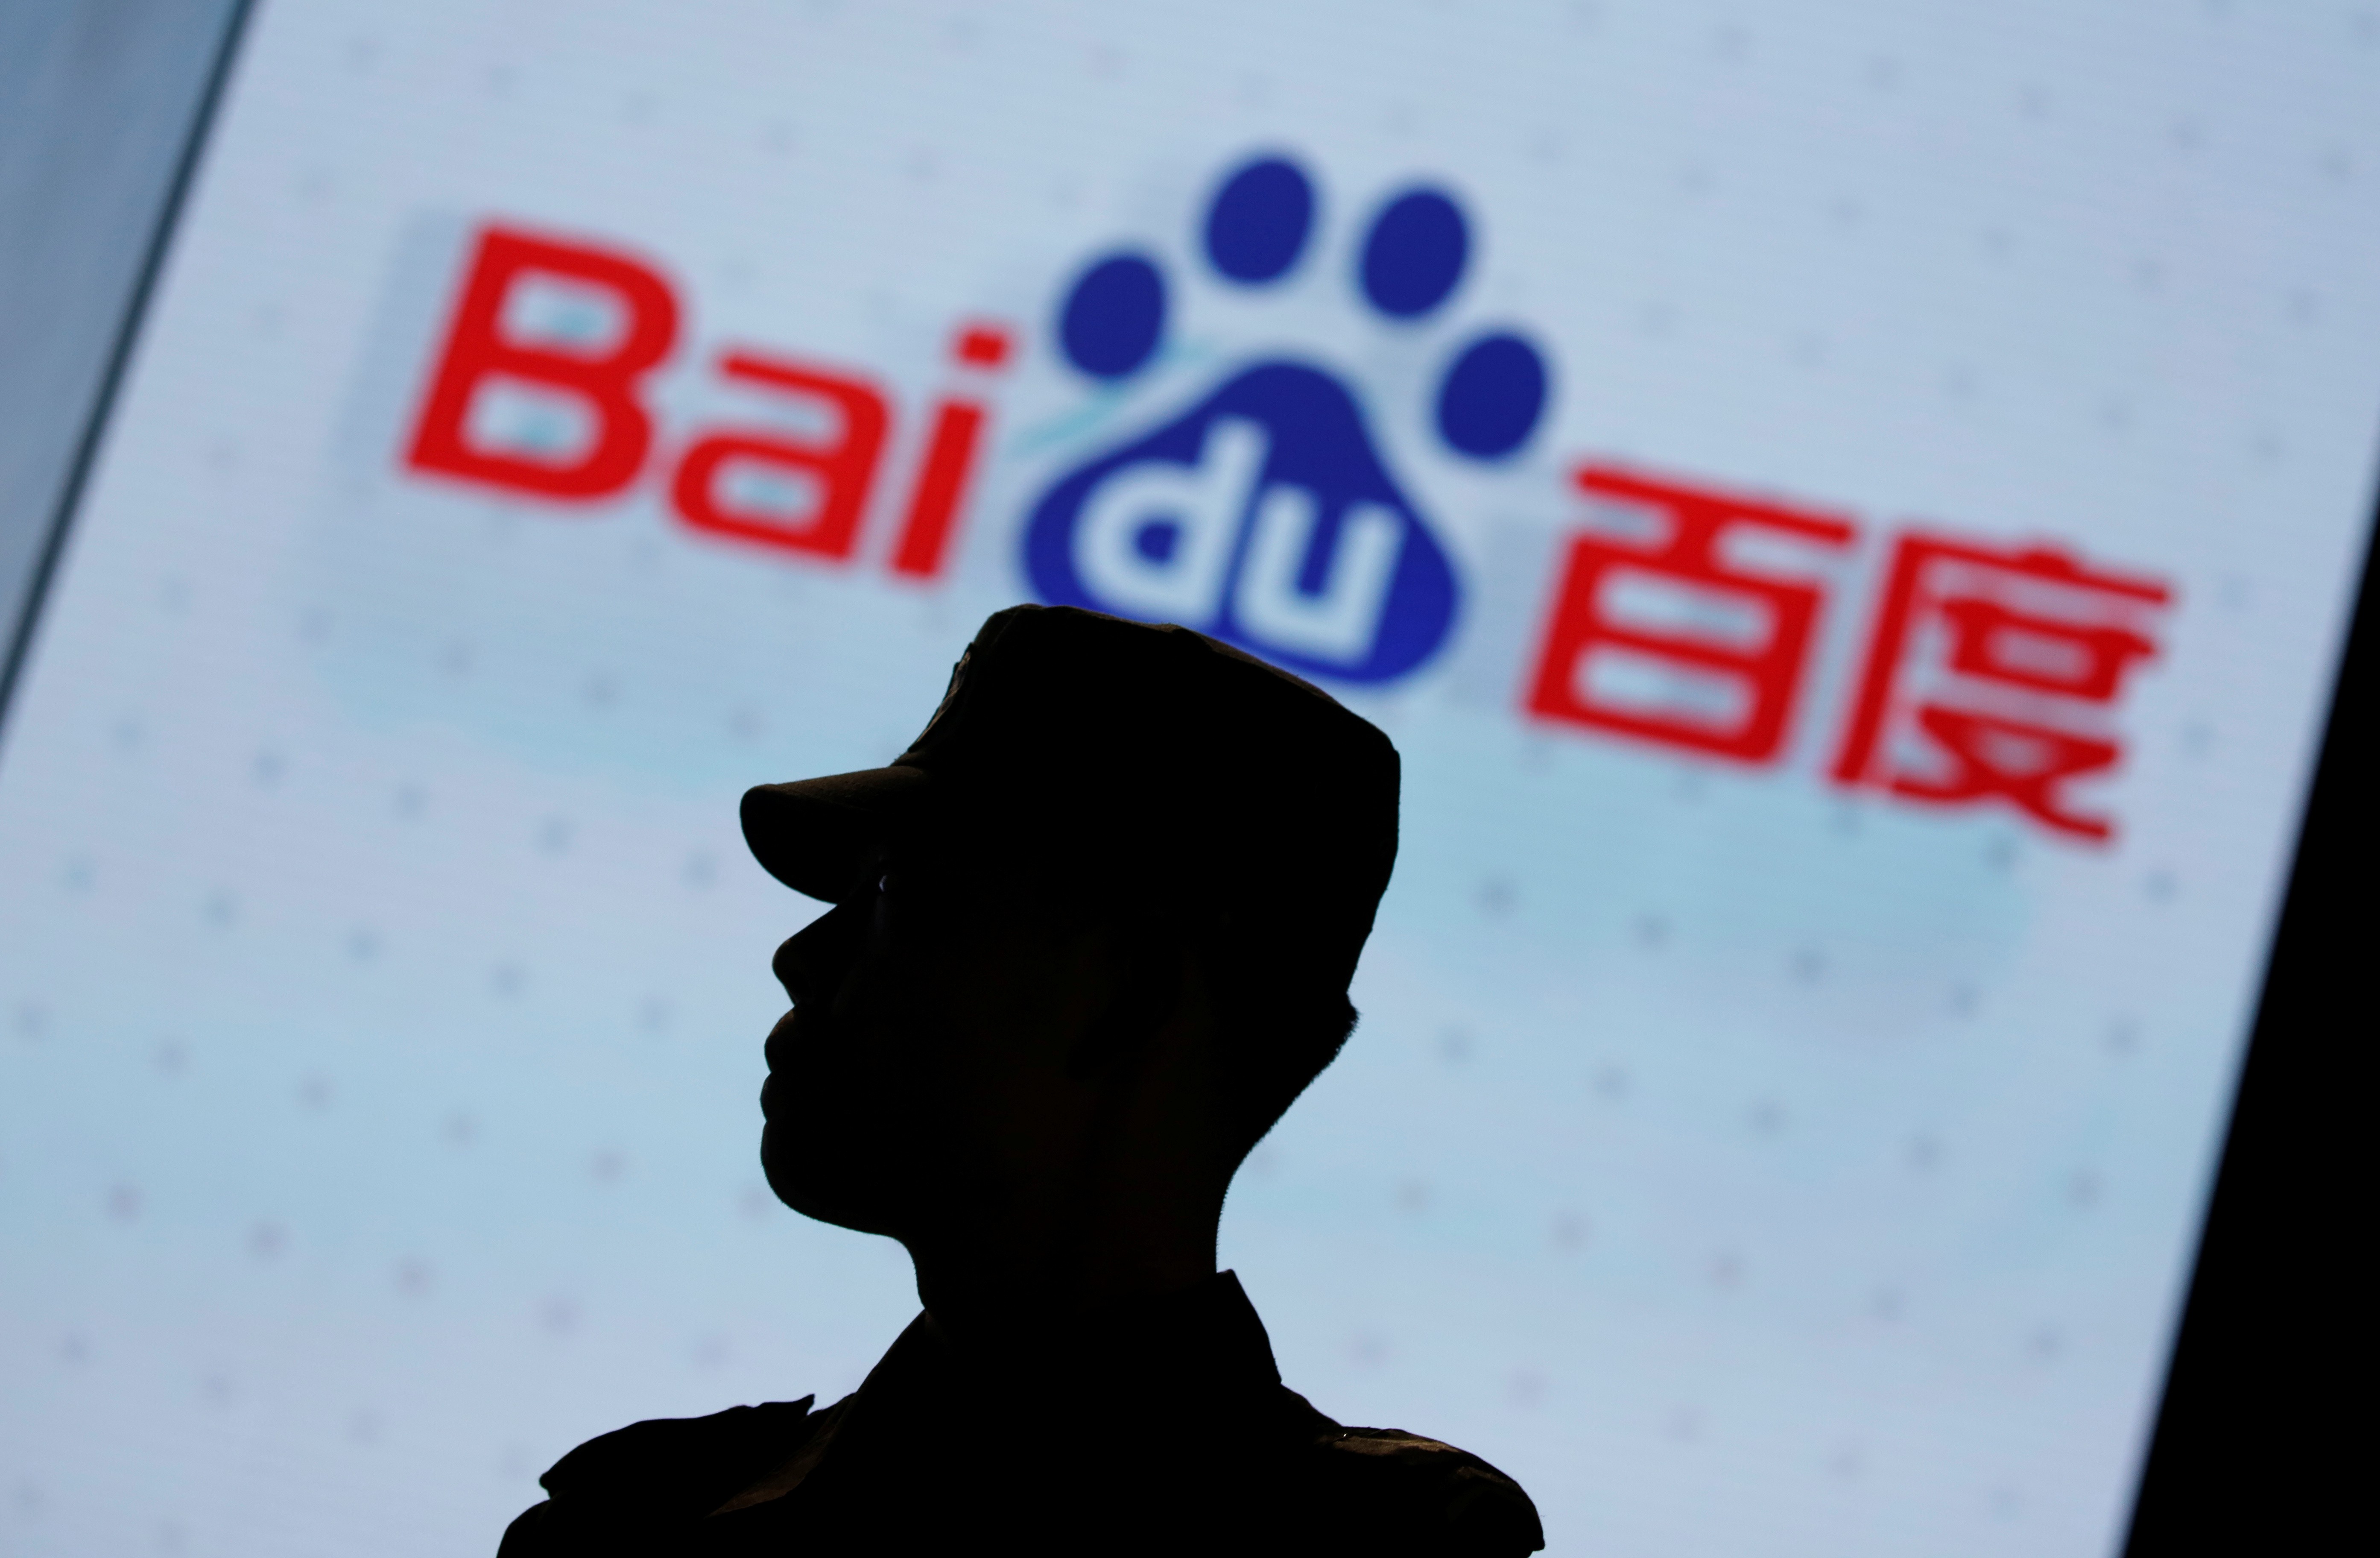 A security personnel stands guard at the opening session of Baidu's annual AI developers conference Baidu Create 2019 in Beijing, China, July 3, 2019. Photo: Reuters